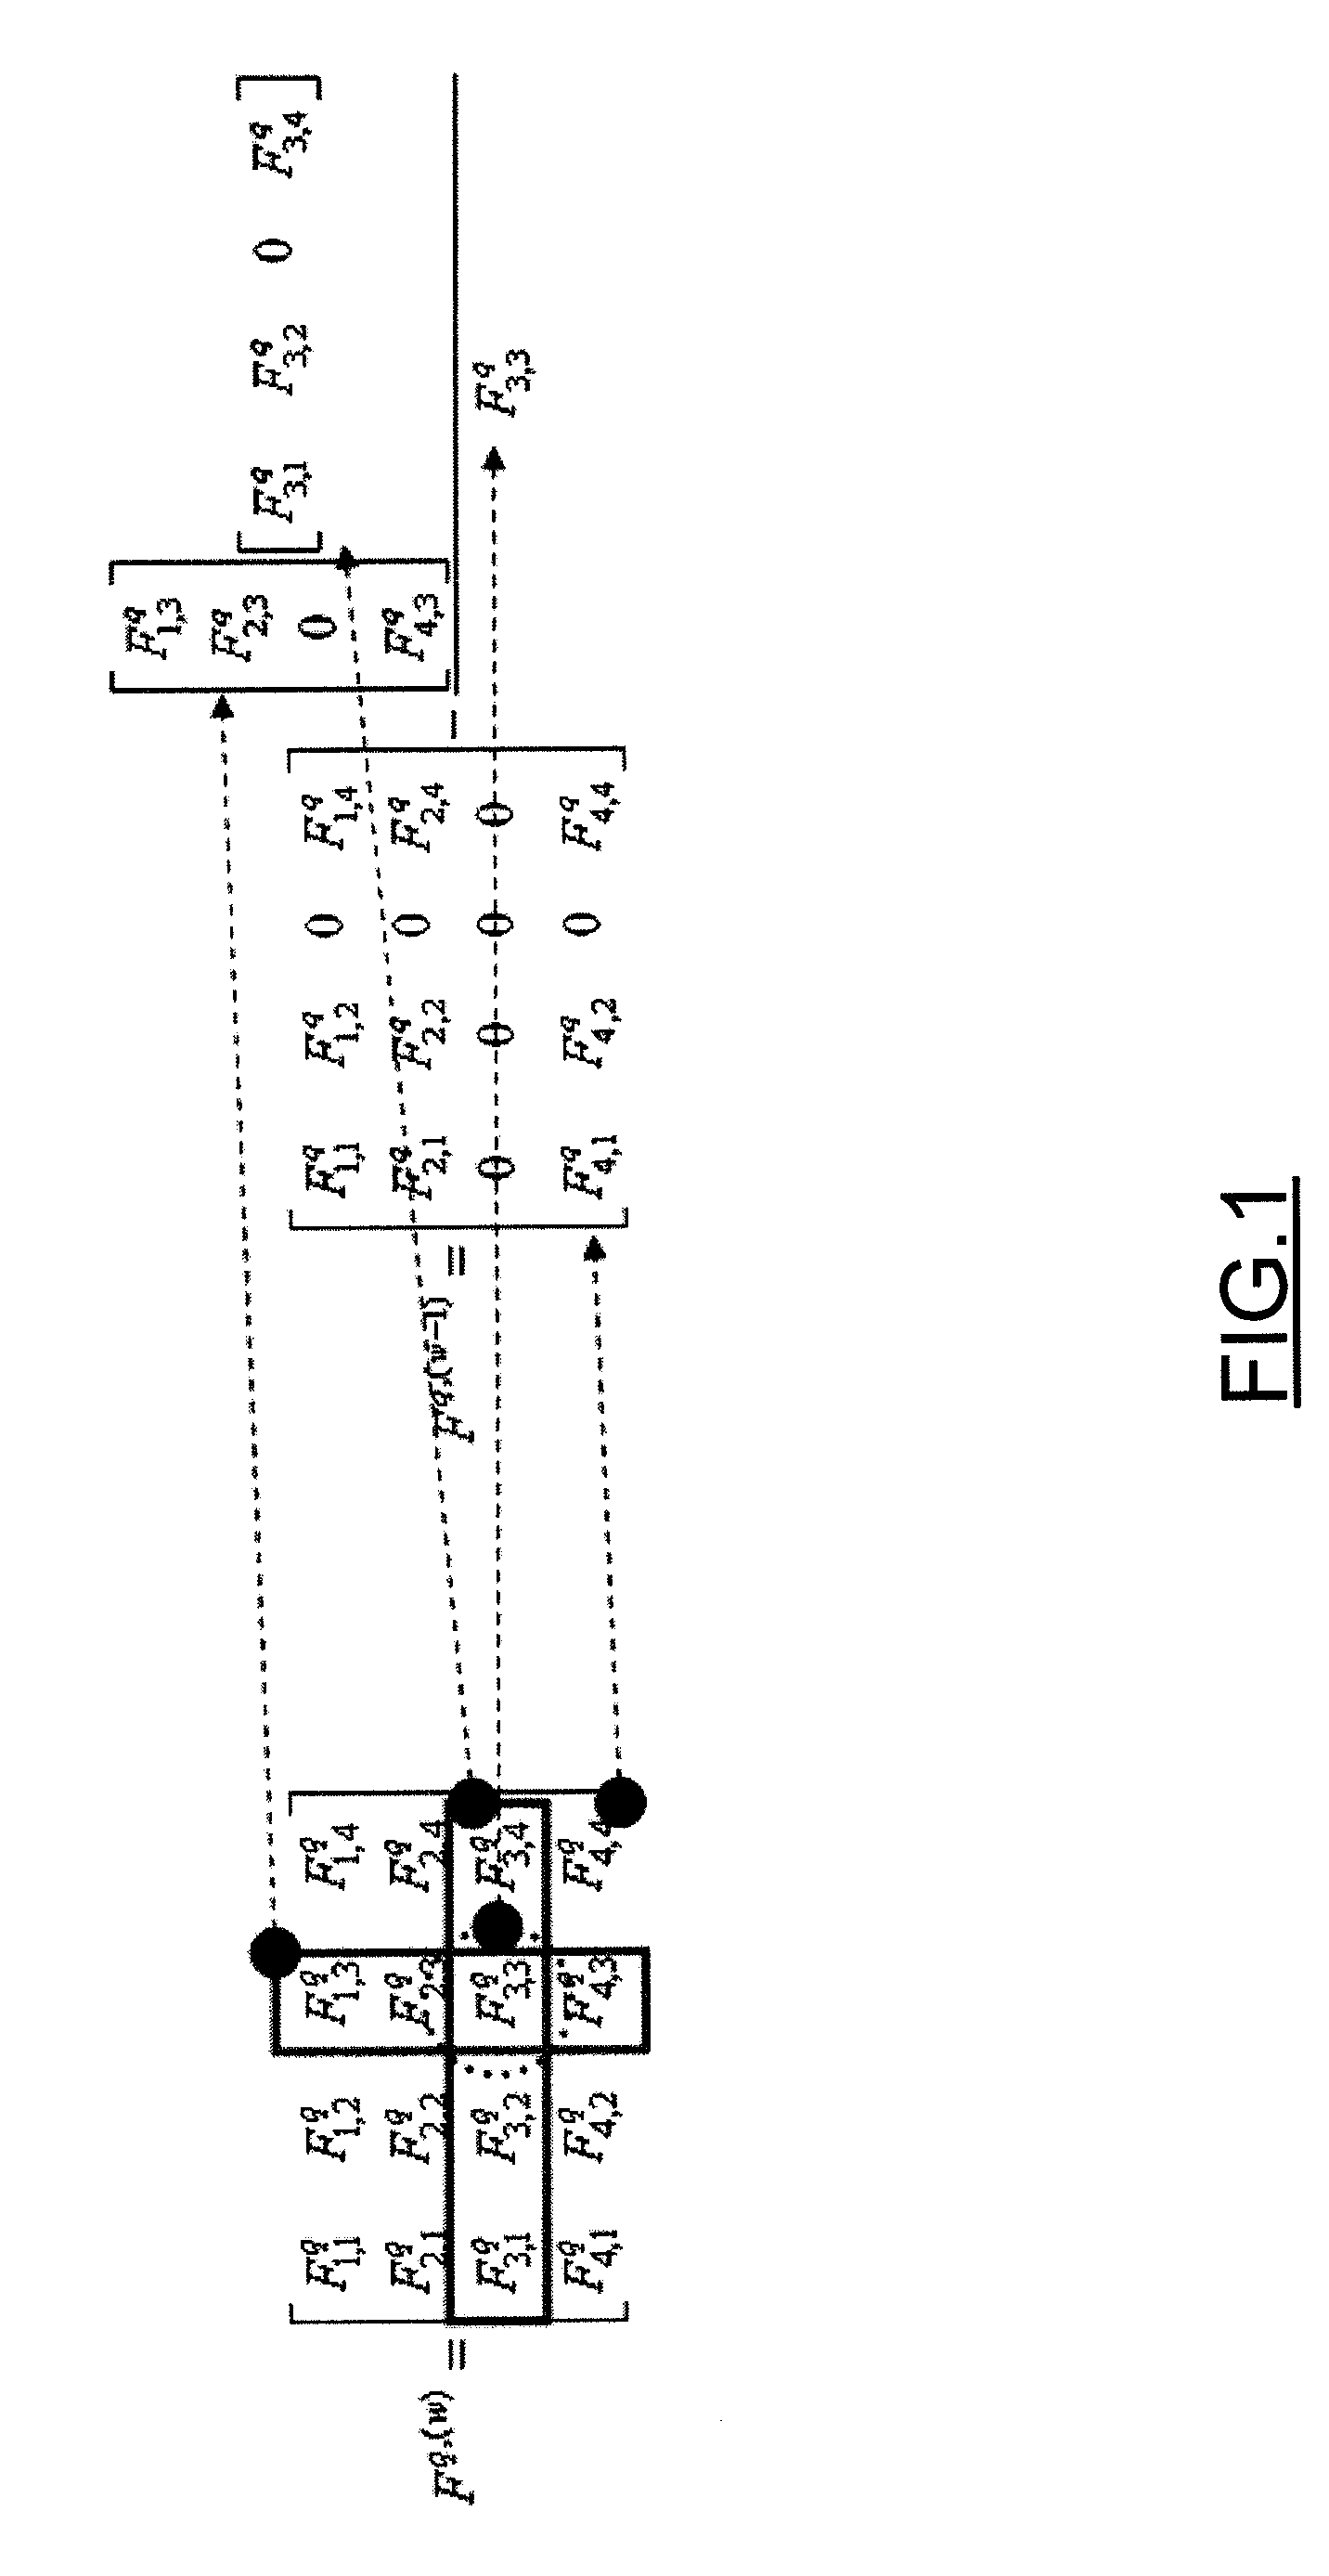 Method, apparatus, and computer program product for decoding signals in a wireless communication environment